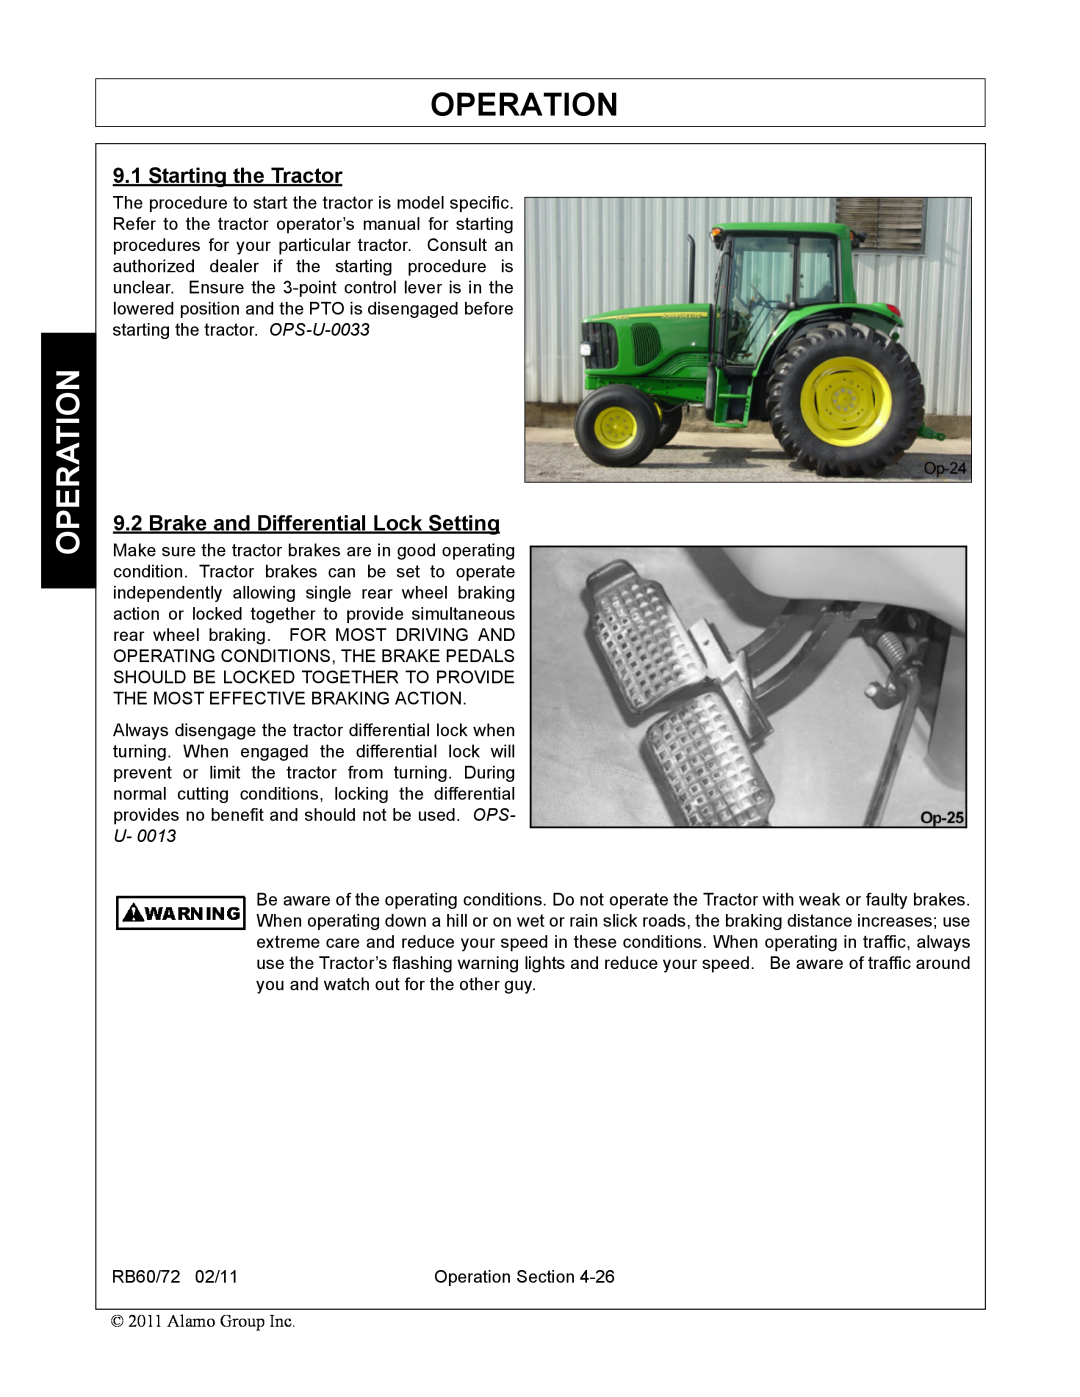 Blue Rhino RB60/72 manual Operation, Starting the Tractor, Brake and Differential Lock Setting 